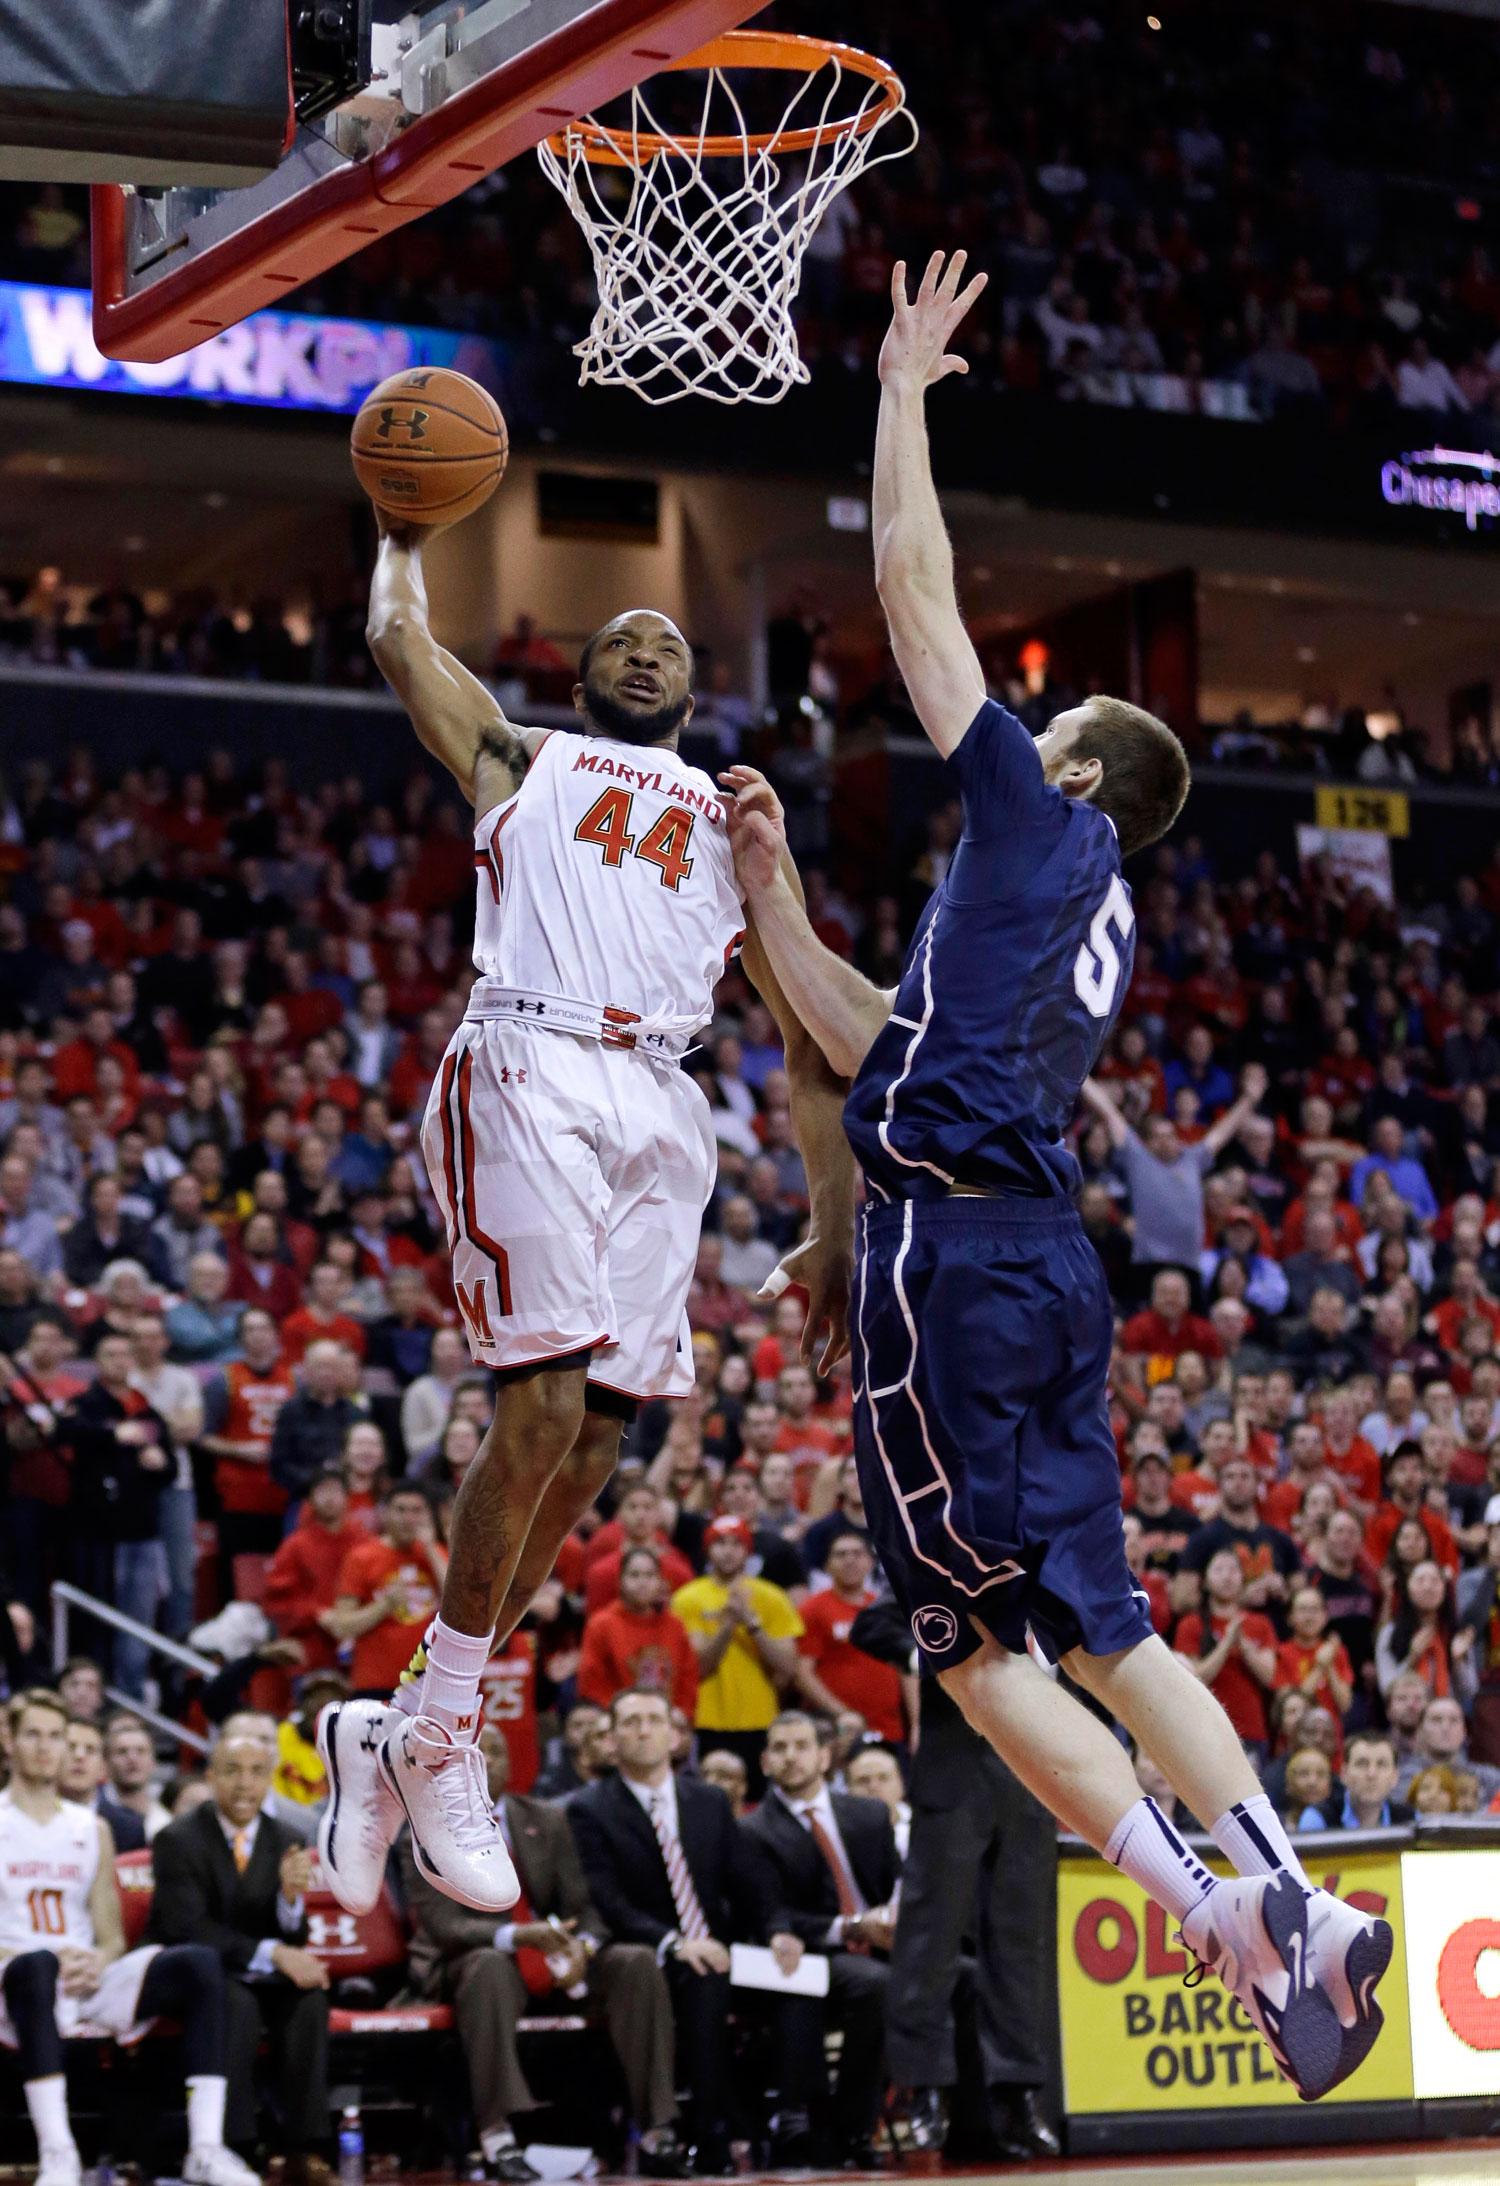 Video: Dez Wells’ thundering dunk — best of his career?